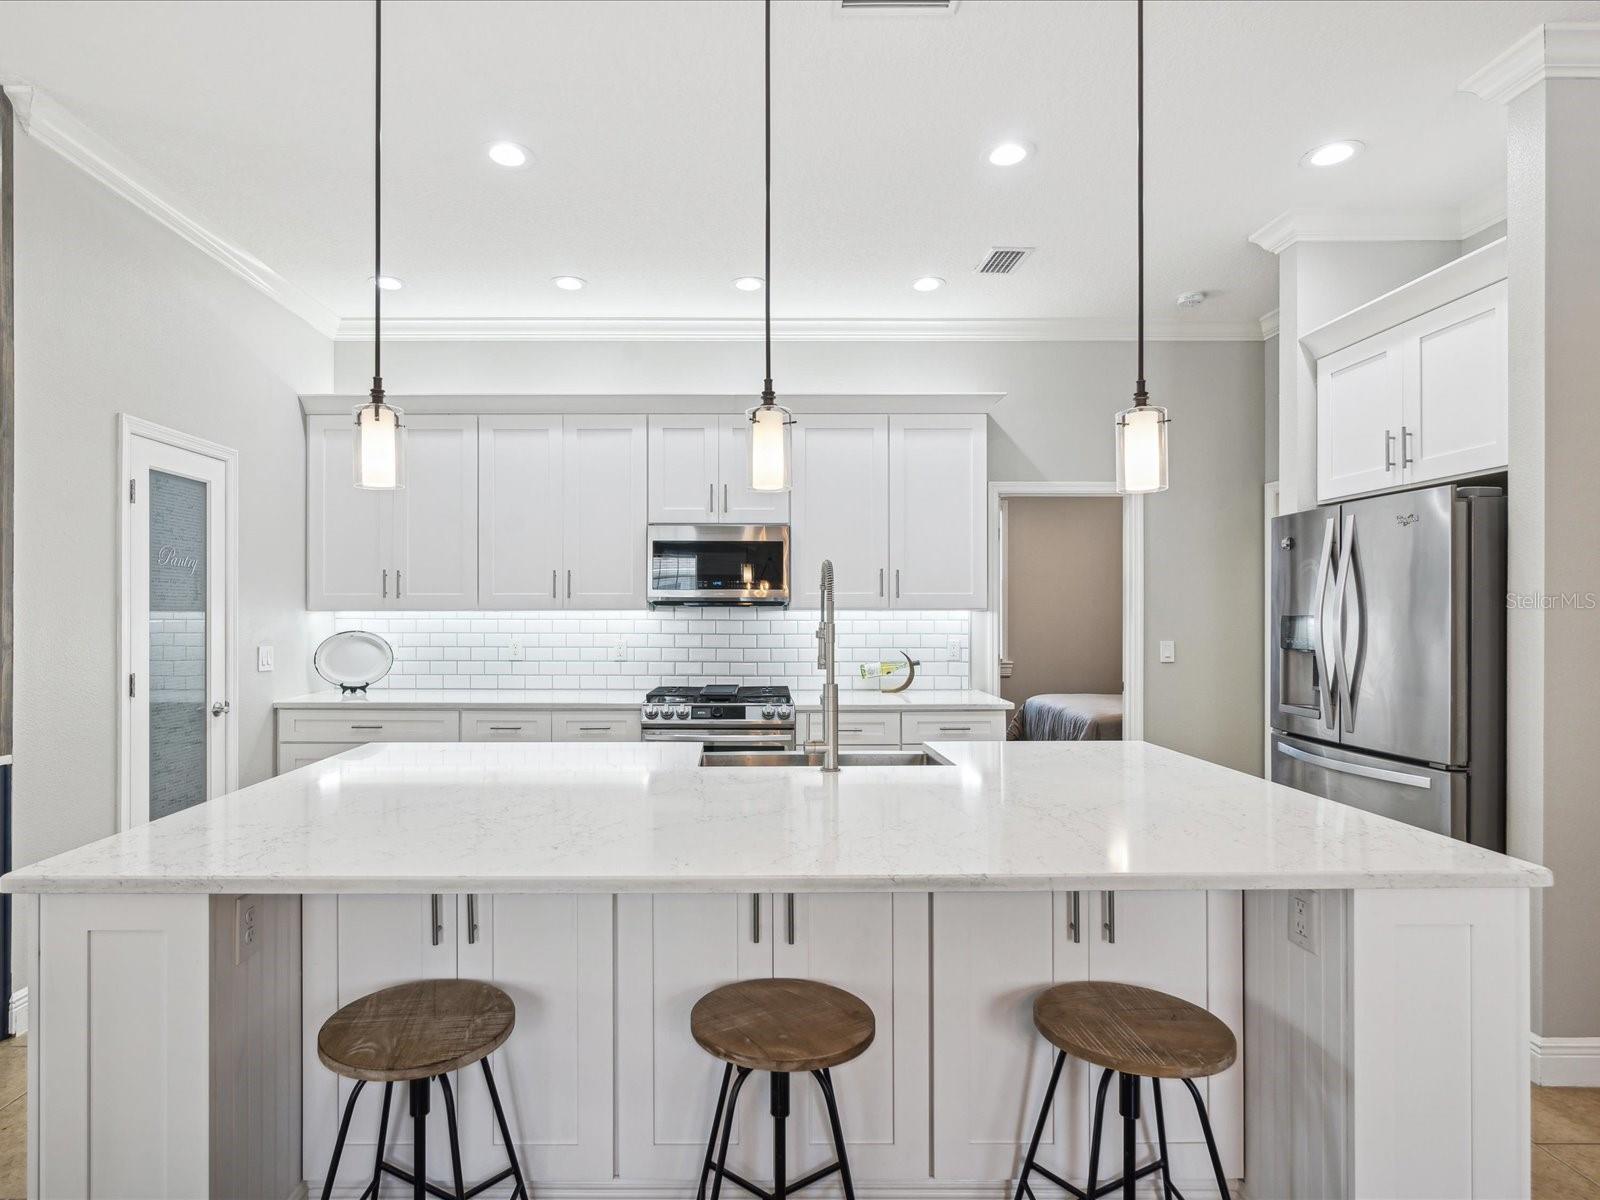 The extra large kitchen island is the focal point of the kitchen. The cabinets and quartz countertops can be used for prep, dining, or serving.